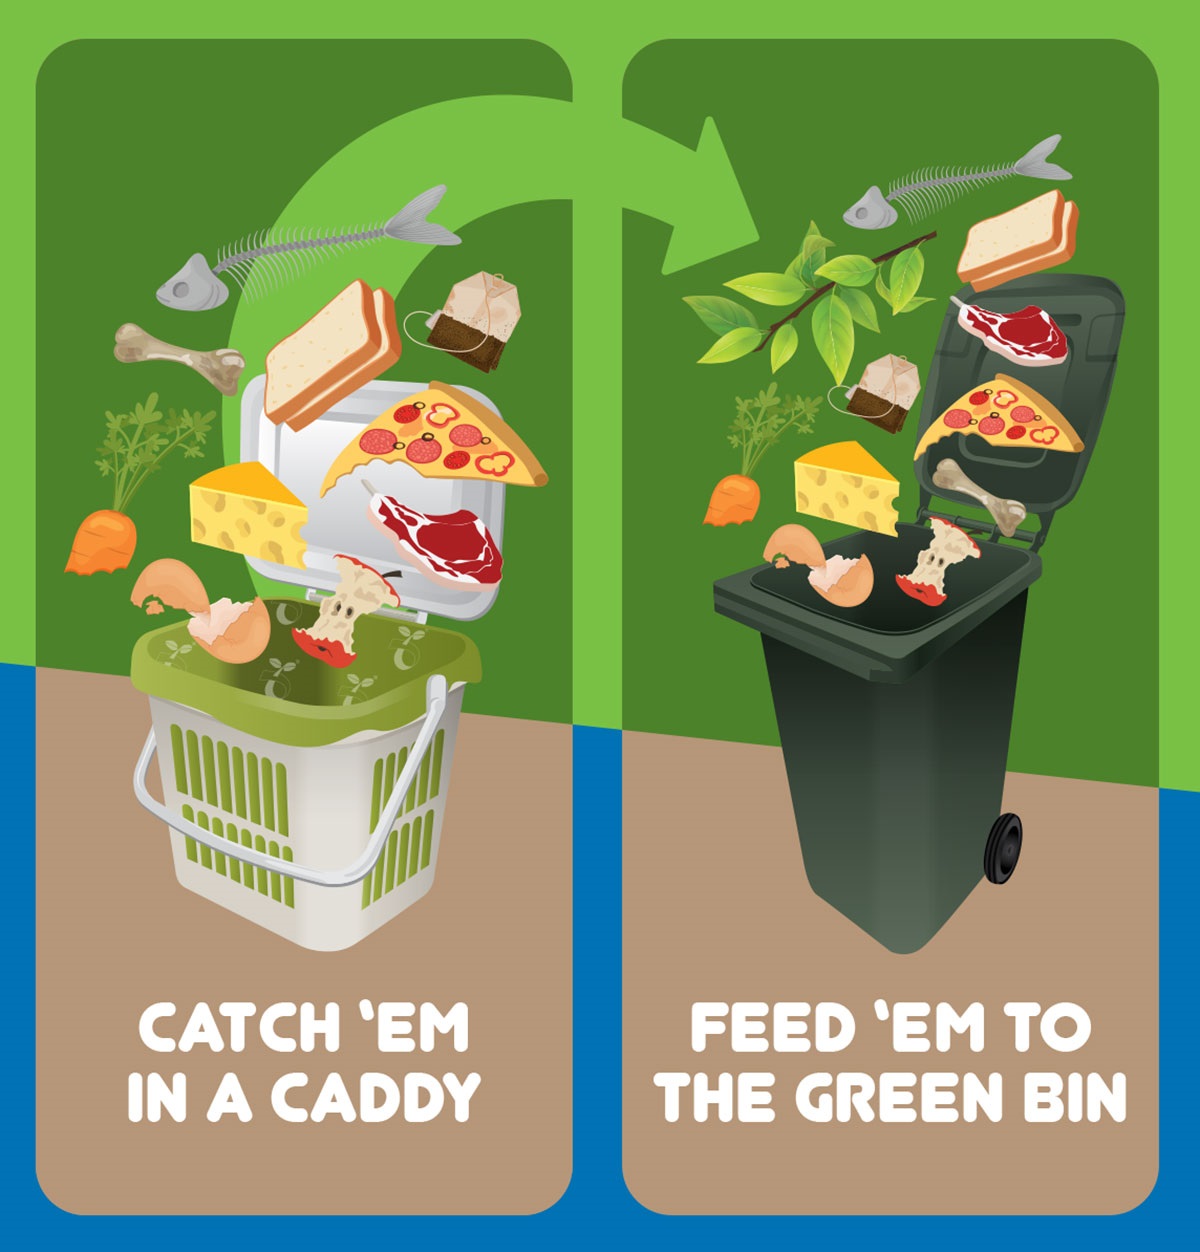 illustration showing food scraps being placed in green bin